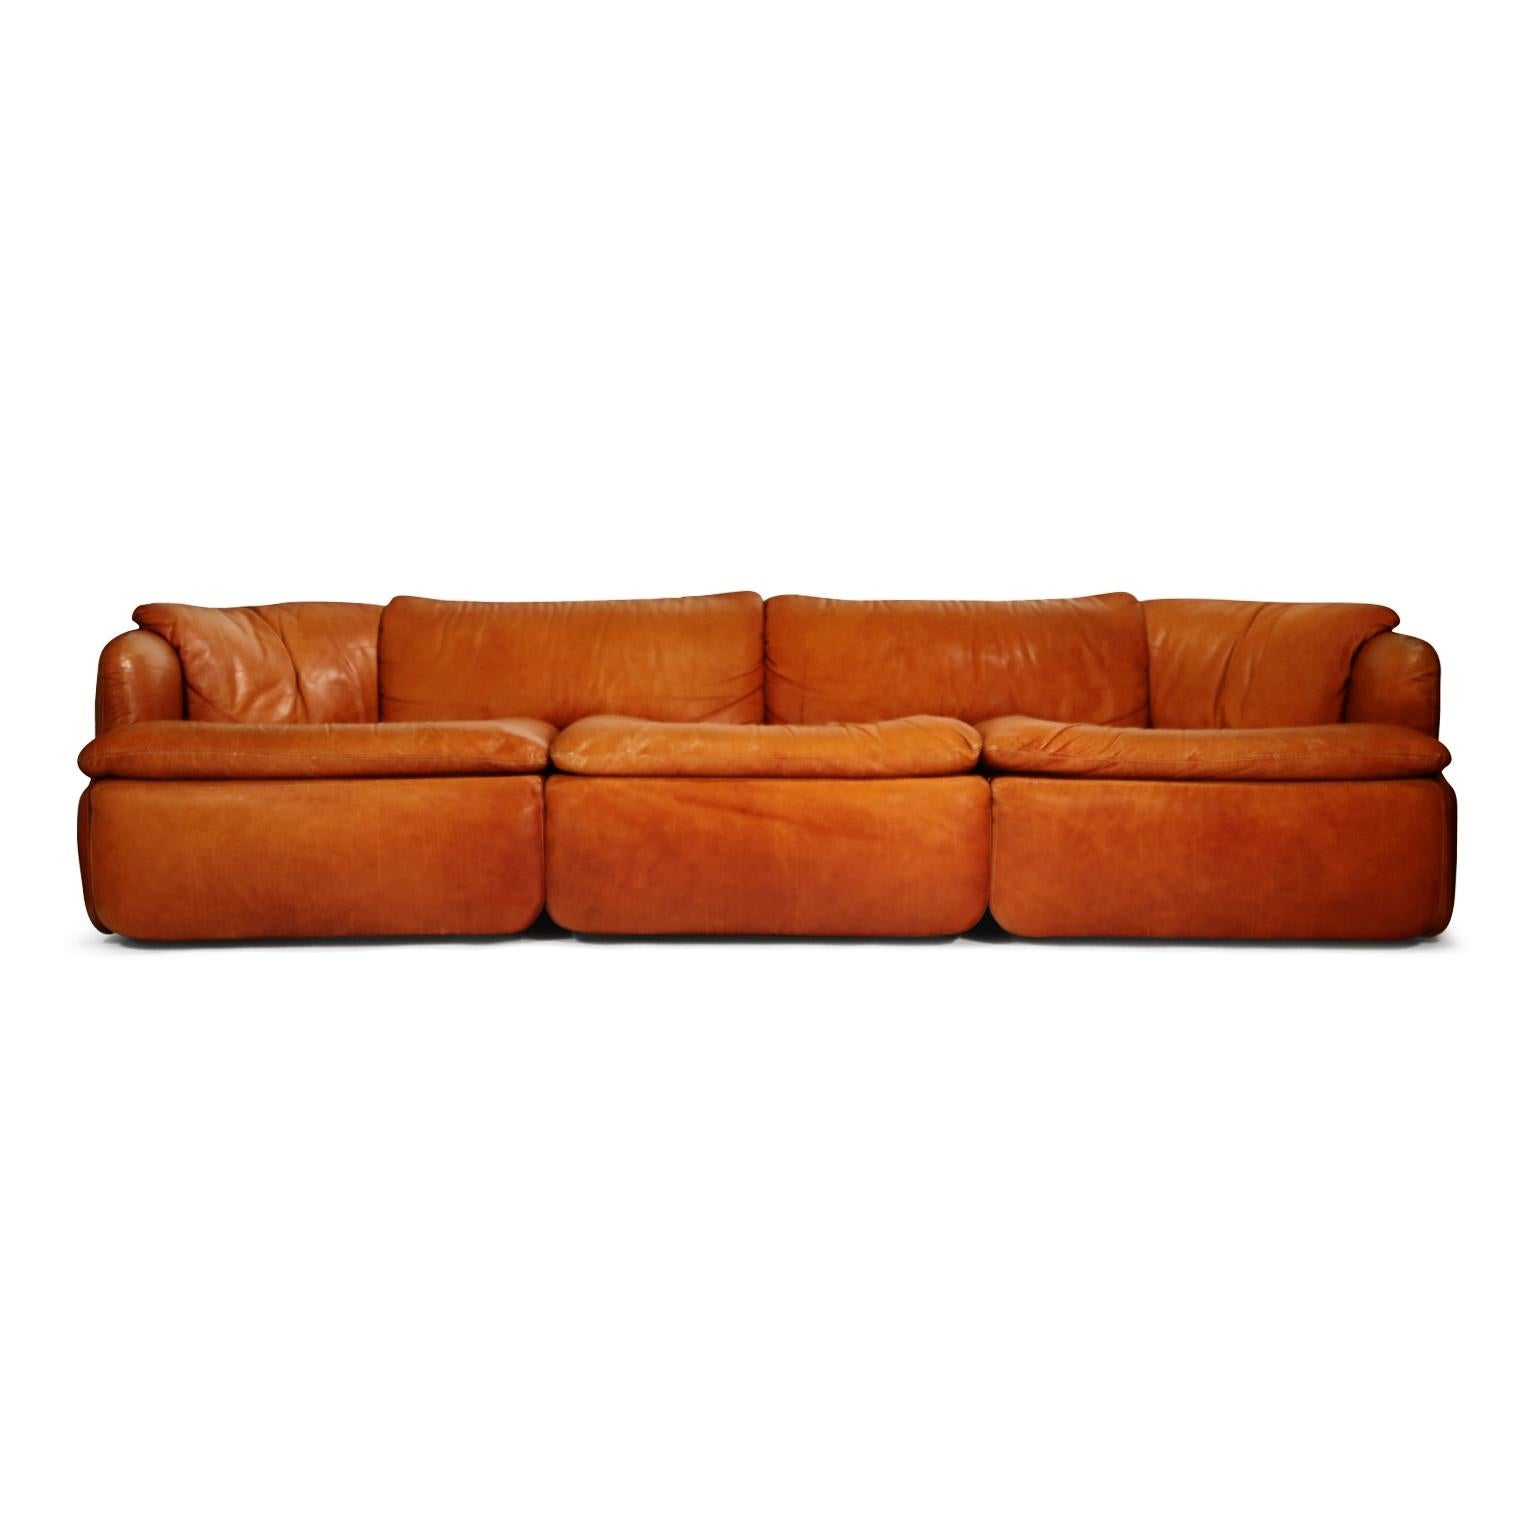 A beautiful 'Confidential' three-seat sofa by Alberto Roselli for Saporiti Italia in gorgeous distressed cognac colored leather. 

This rare and on-trend designer sofa was designed in the 1972 by the Italian architect, Alberto Rosselli. Incredible